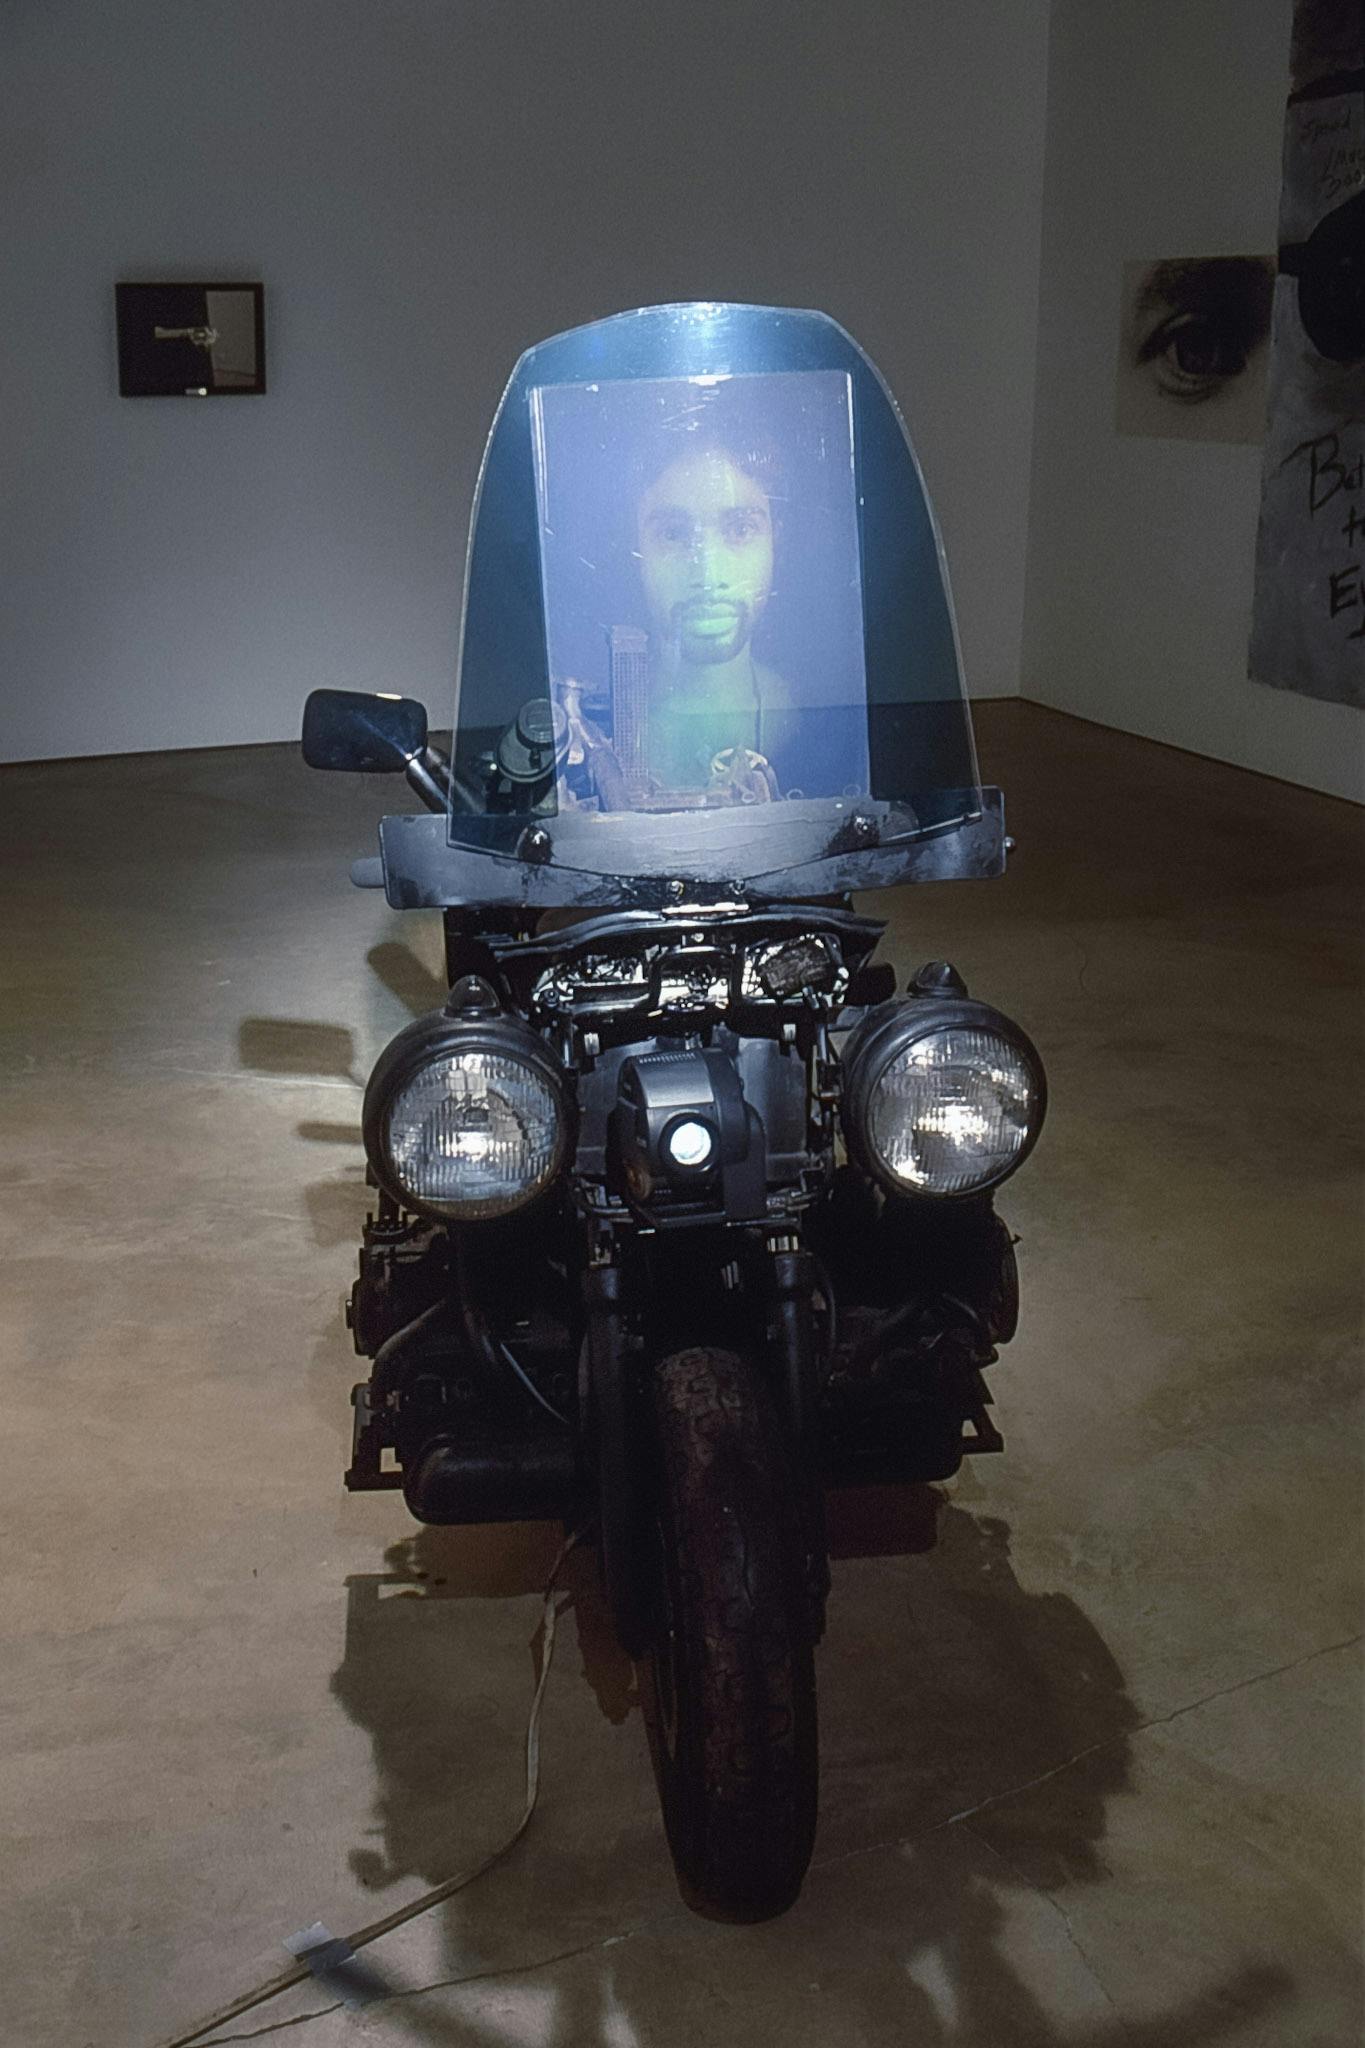 A black motorbike is installed in the gallery. An upside-down face shield is attached on top of the bike’s front, on which a man’s portrait photograph is attached. Handles are missing from this bike. 